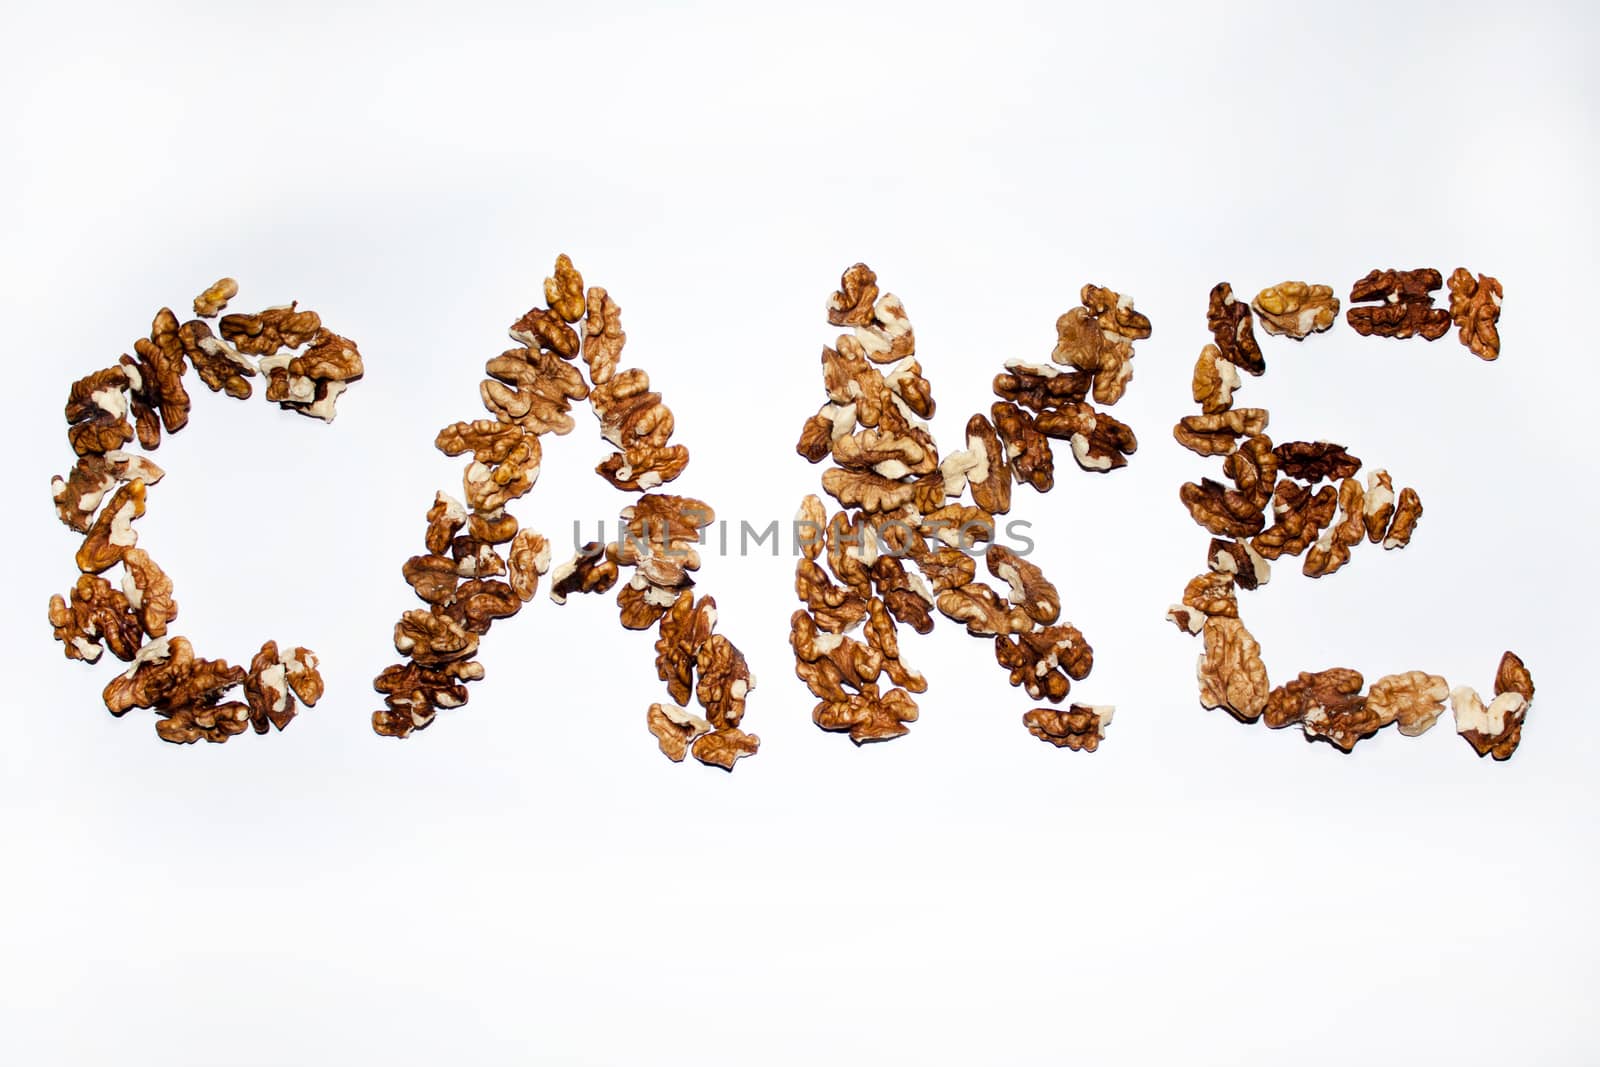 Cake sign with walnuts on the letters.